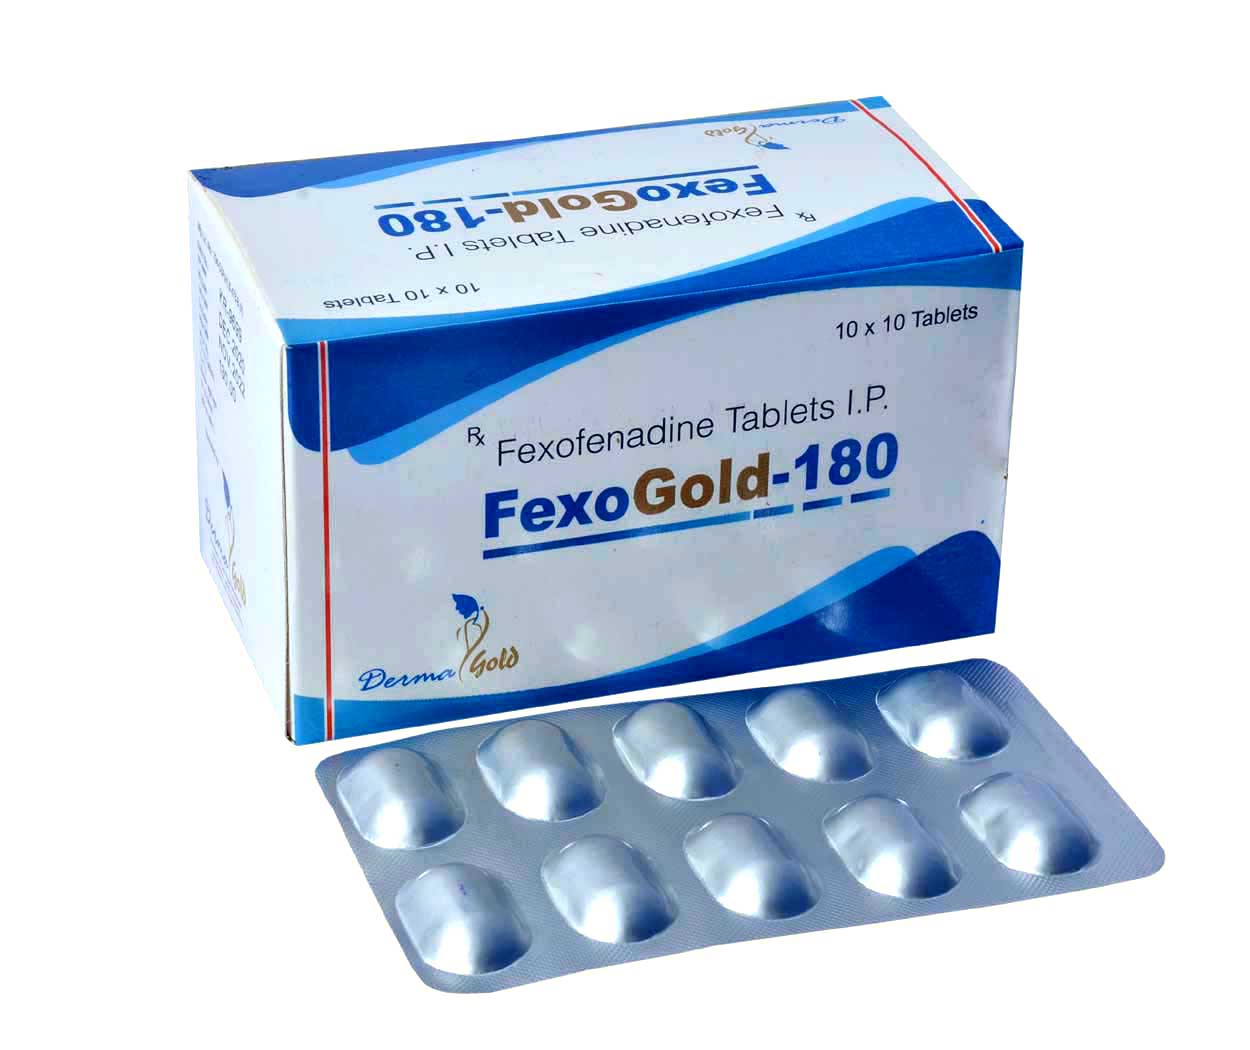 Product Name: FexoGold 180, Compositions of FexoGold 180 are Fexofenadine Tablets IP - Park Pharmaceuticals